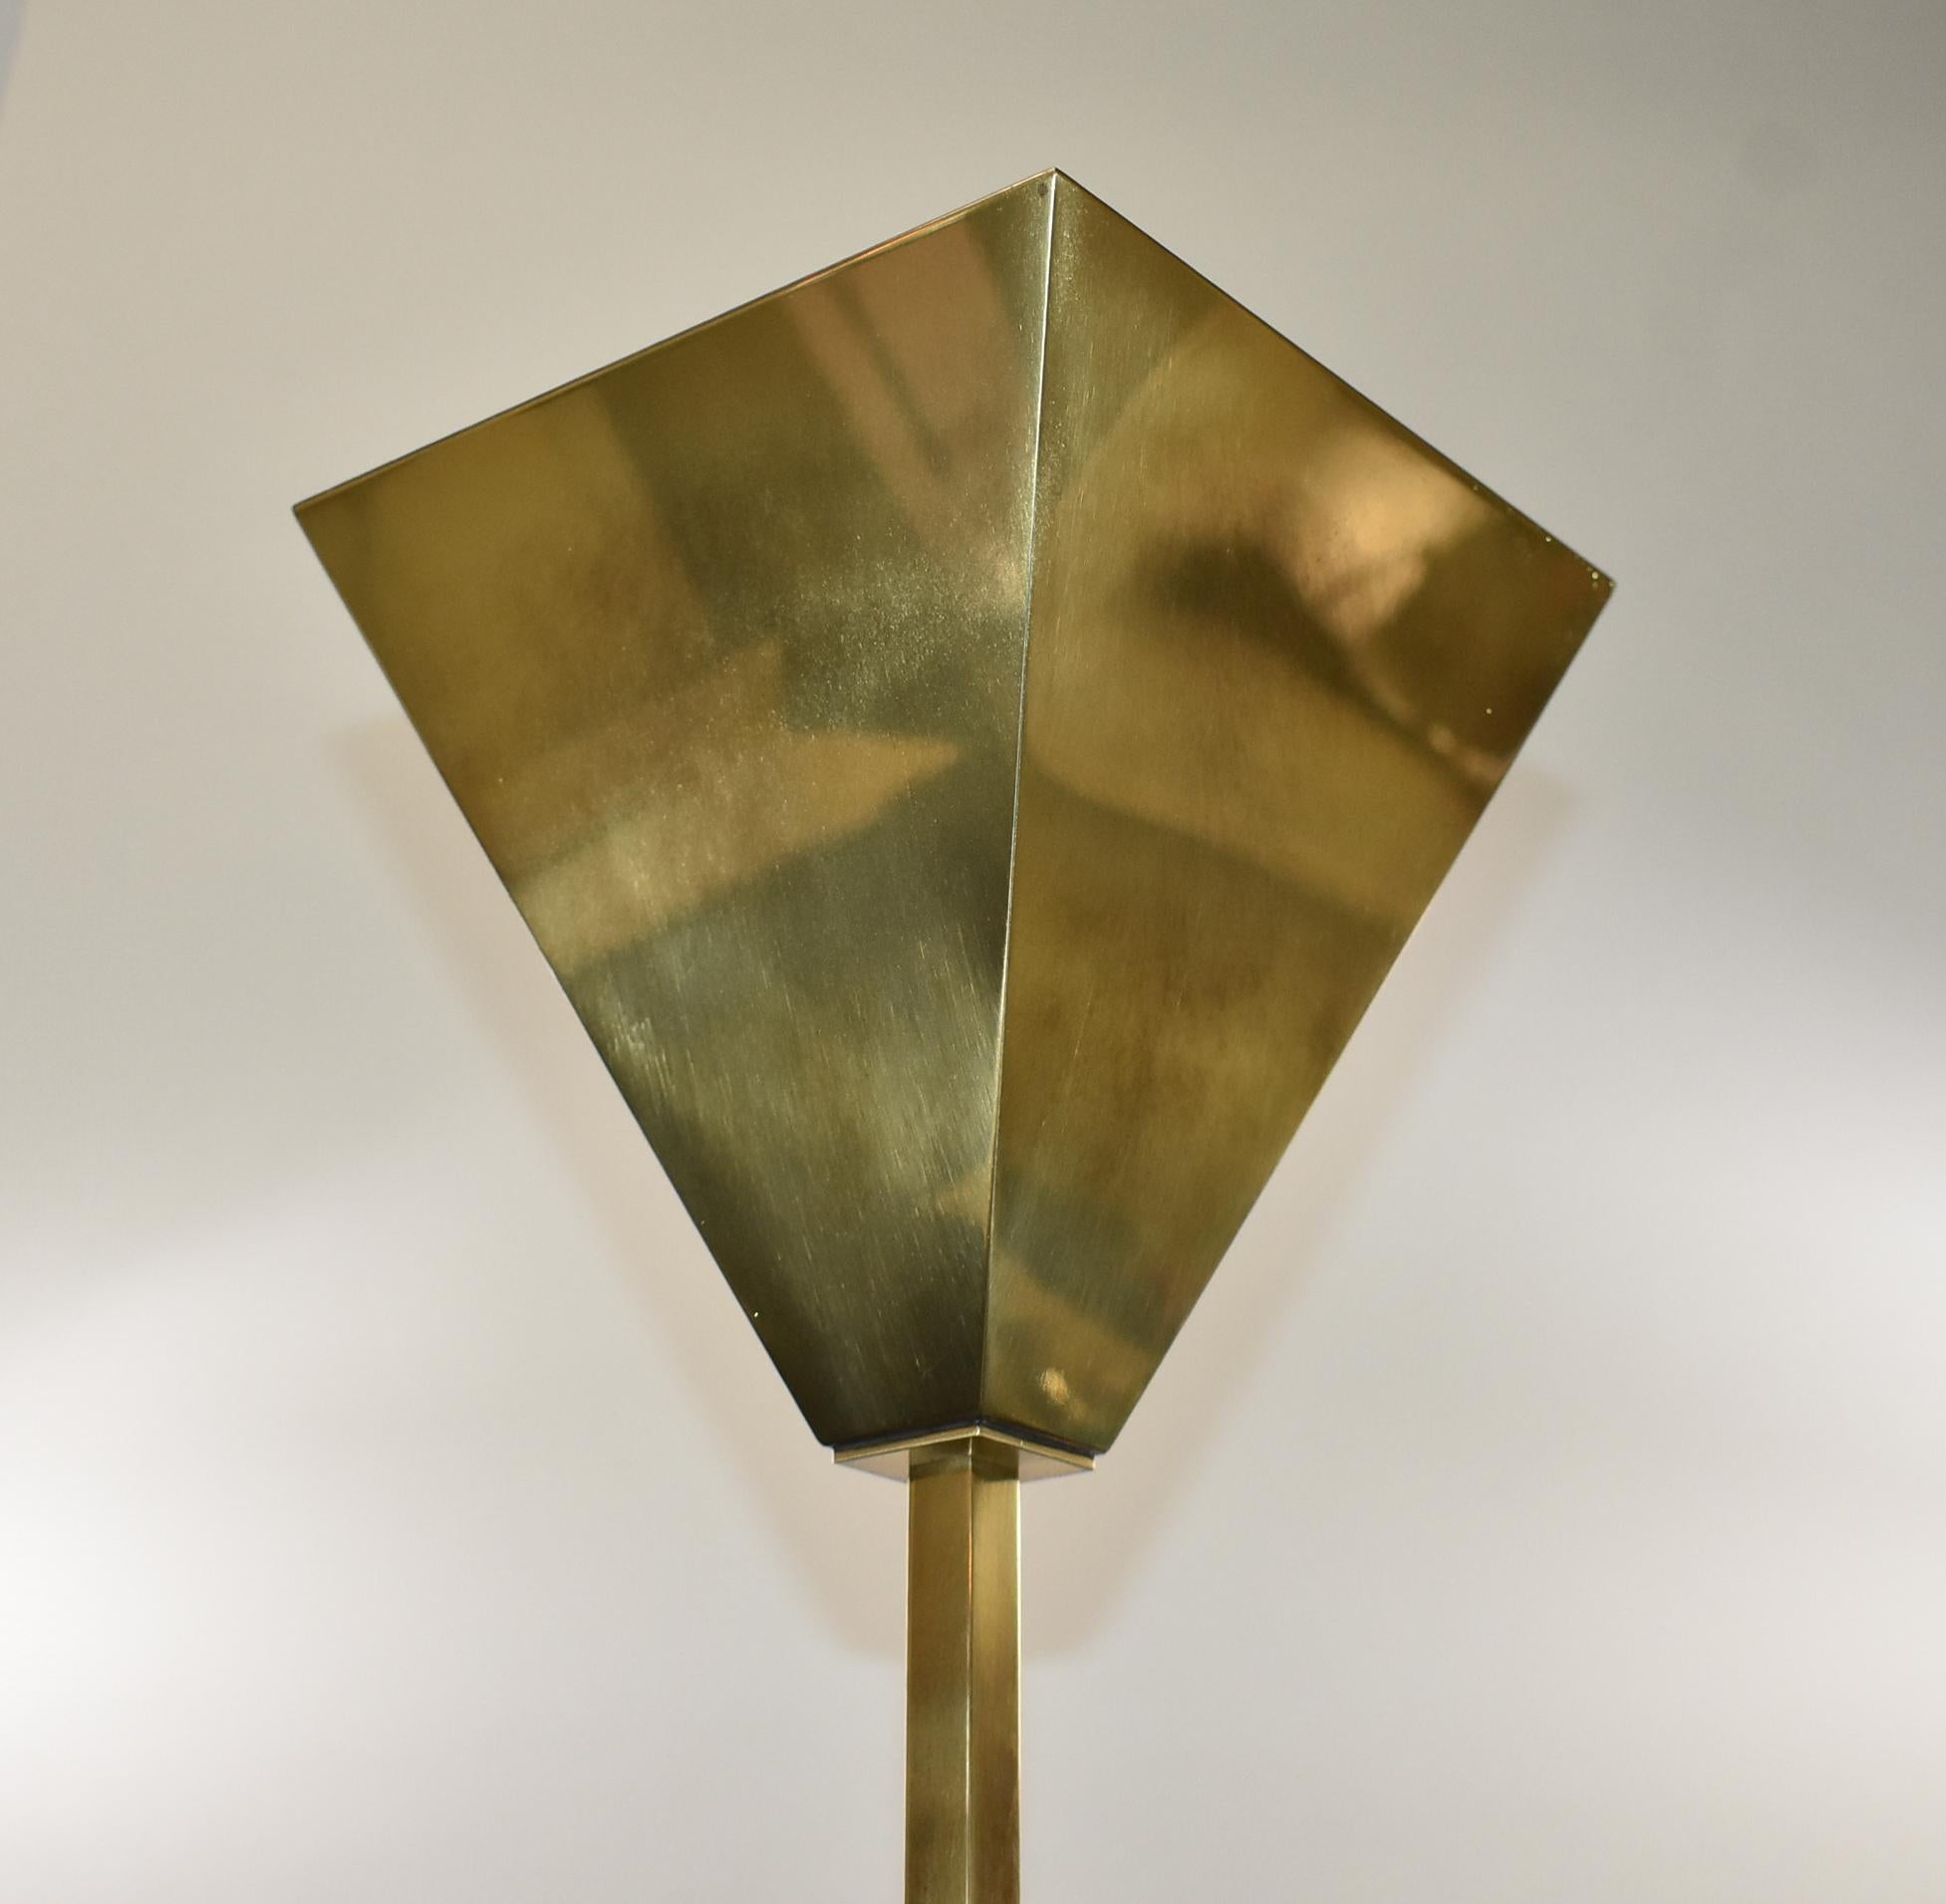 A Postmodern brass touch-on torchiere floor lamp with adjustable height, and three-way switch. This lamp is a streamlined, geometric, neoclassical design with a heavy weighted base. There is minor pitting on the base. This lamp adjusts from 51 3/4